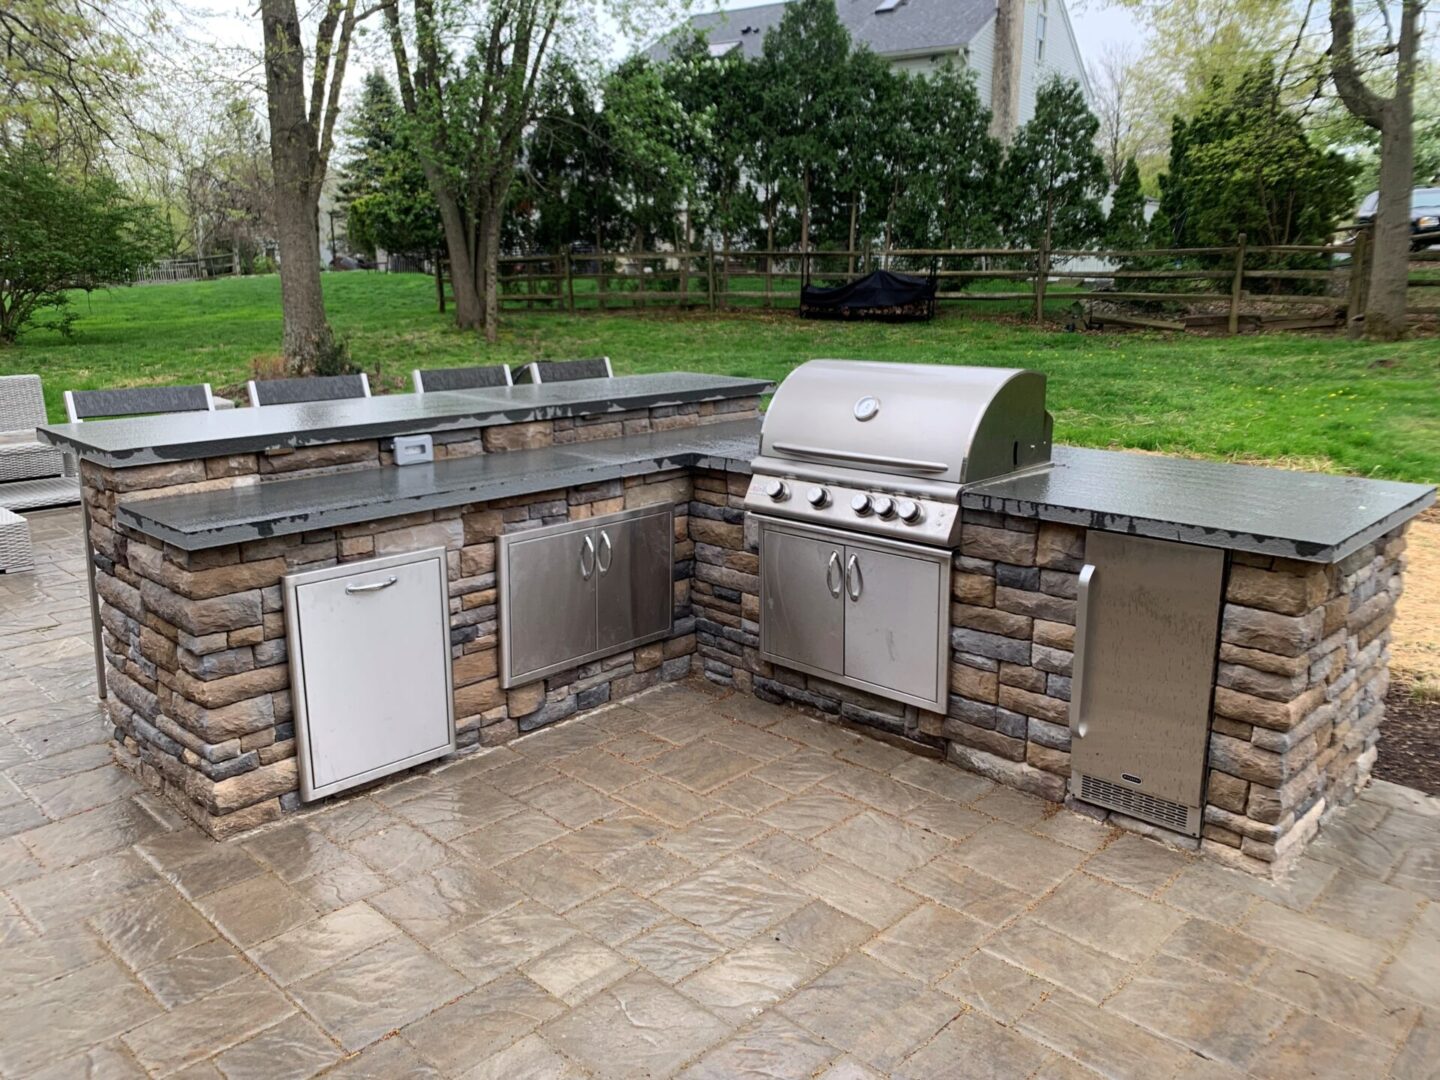 Outdoor Kitchen, Stonework and Serving Area with Chairs